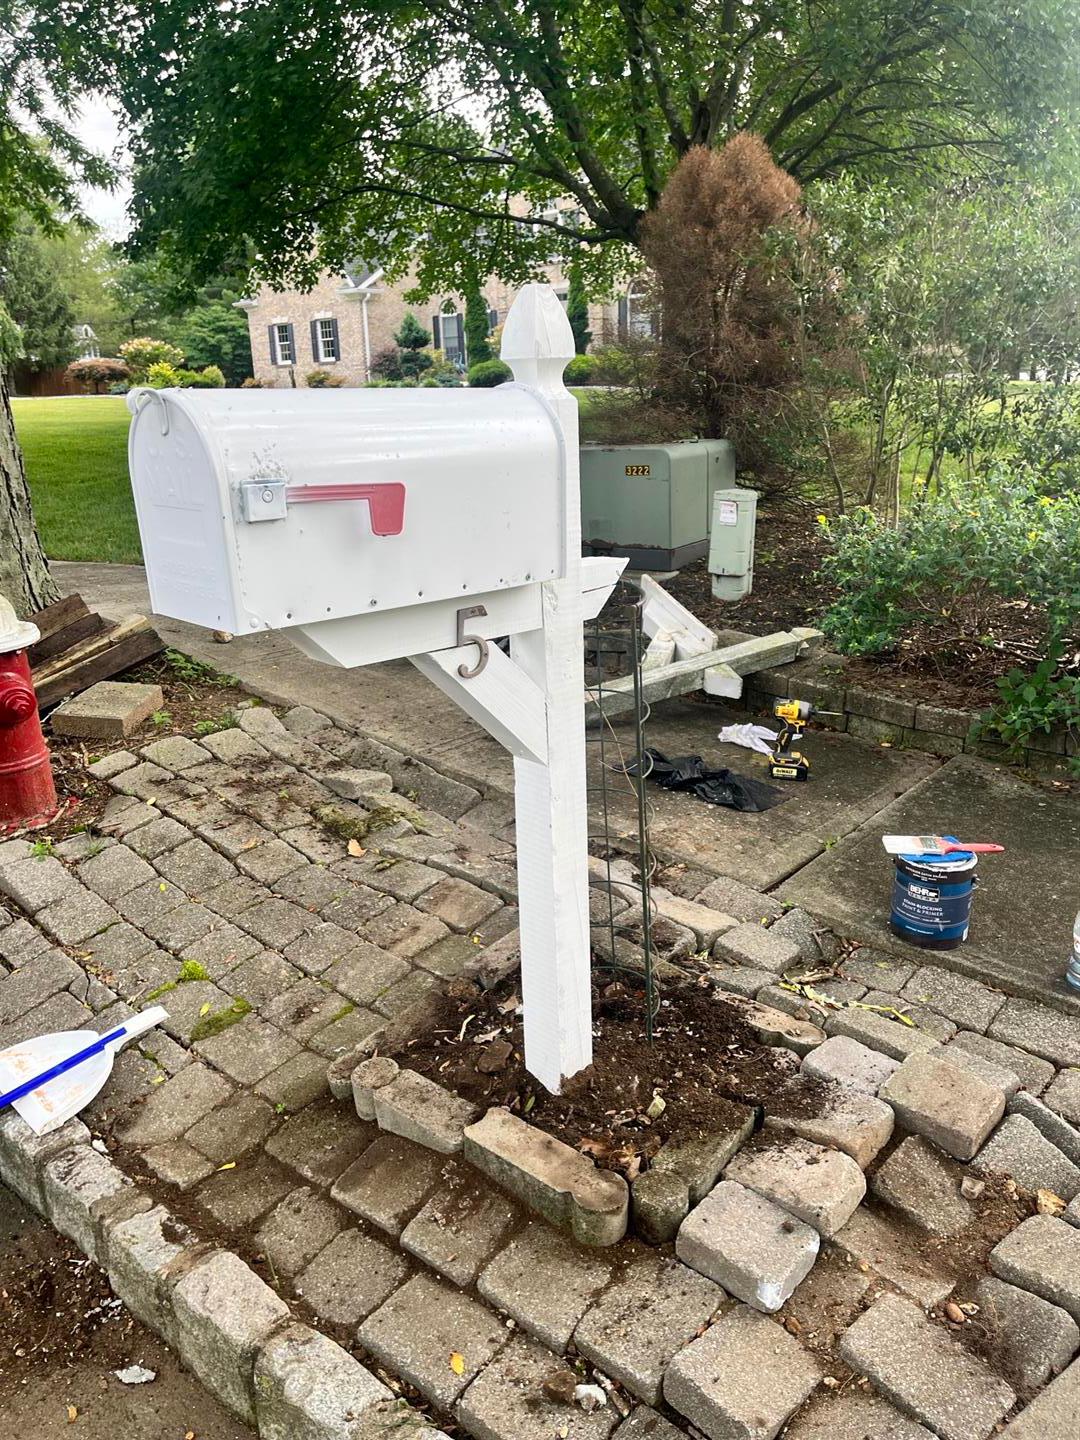 Upgrade your home's exterior with WorldWide Handyman's mailbox replacement service. Our professionals will install a new mailbox that not only adds a touch of curb appeal but also ensures the safe and secure delivery of your mail and packages.